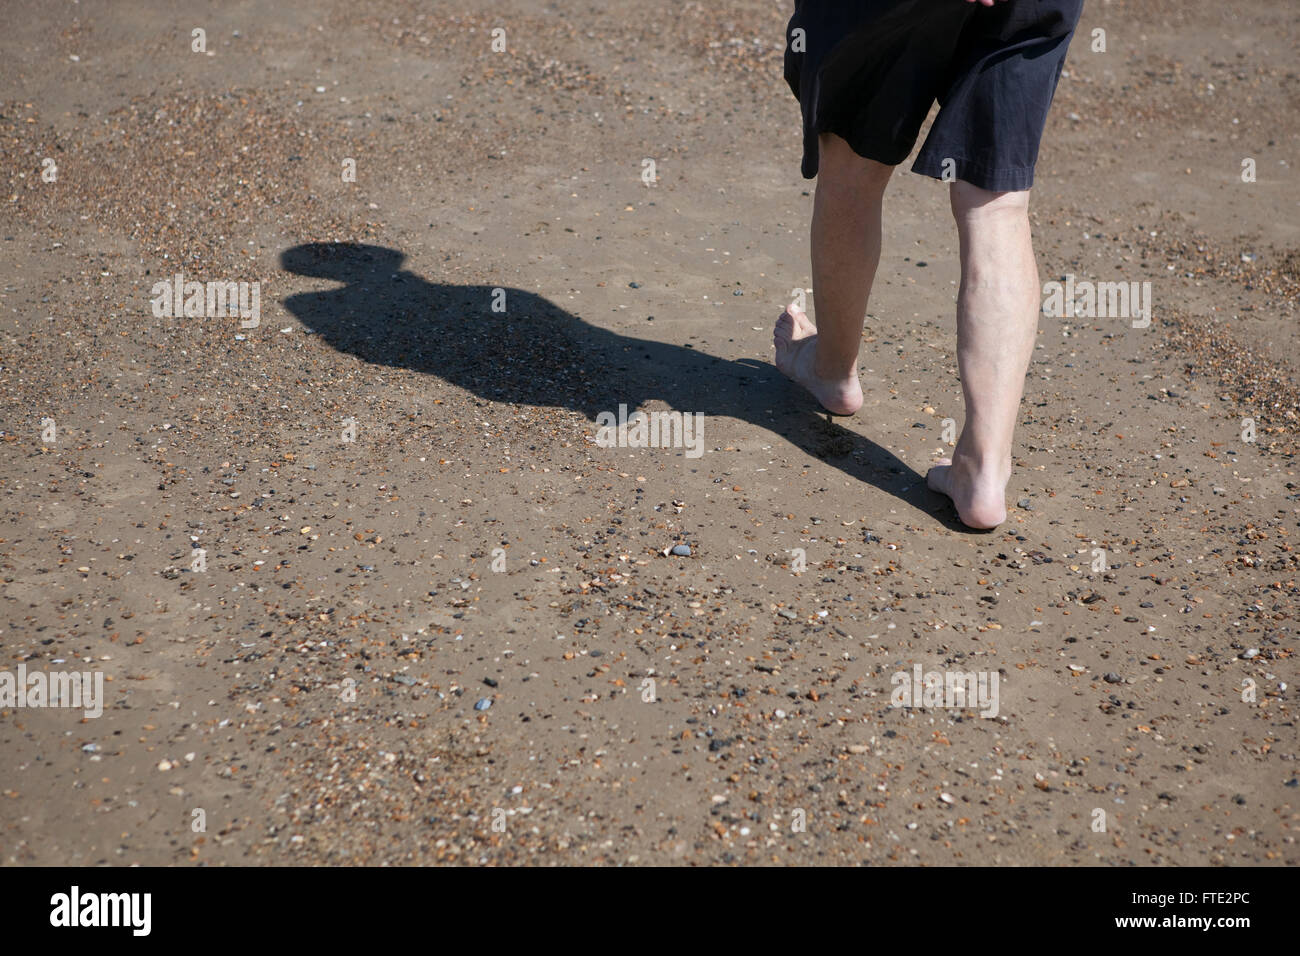 The llegs of a male walking on a beach and wading or paddling in the sea, the body throws a shadow of the figure across the sand as the person enjoys a cool walk on this hot summers day on holiday or vacation. Stock Photo